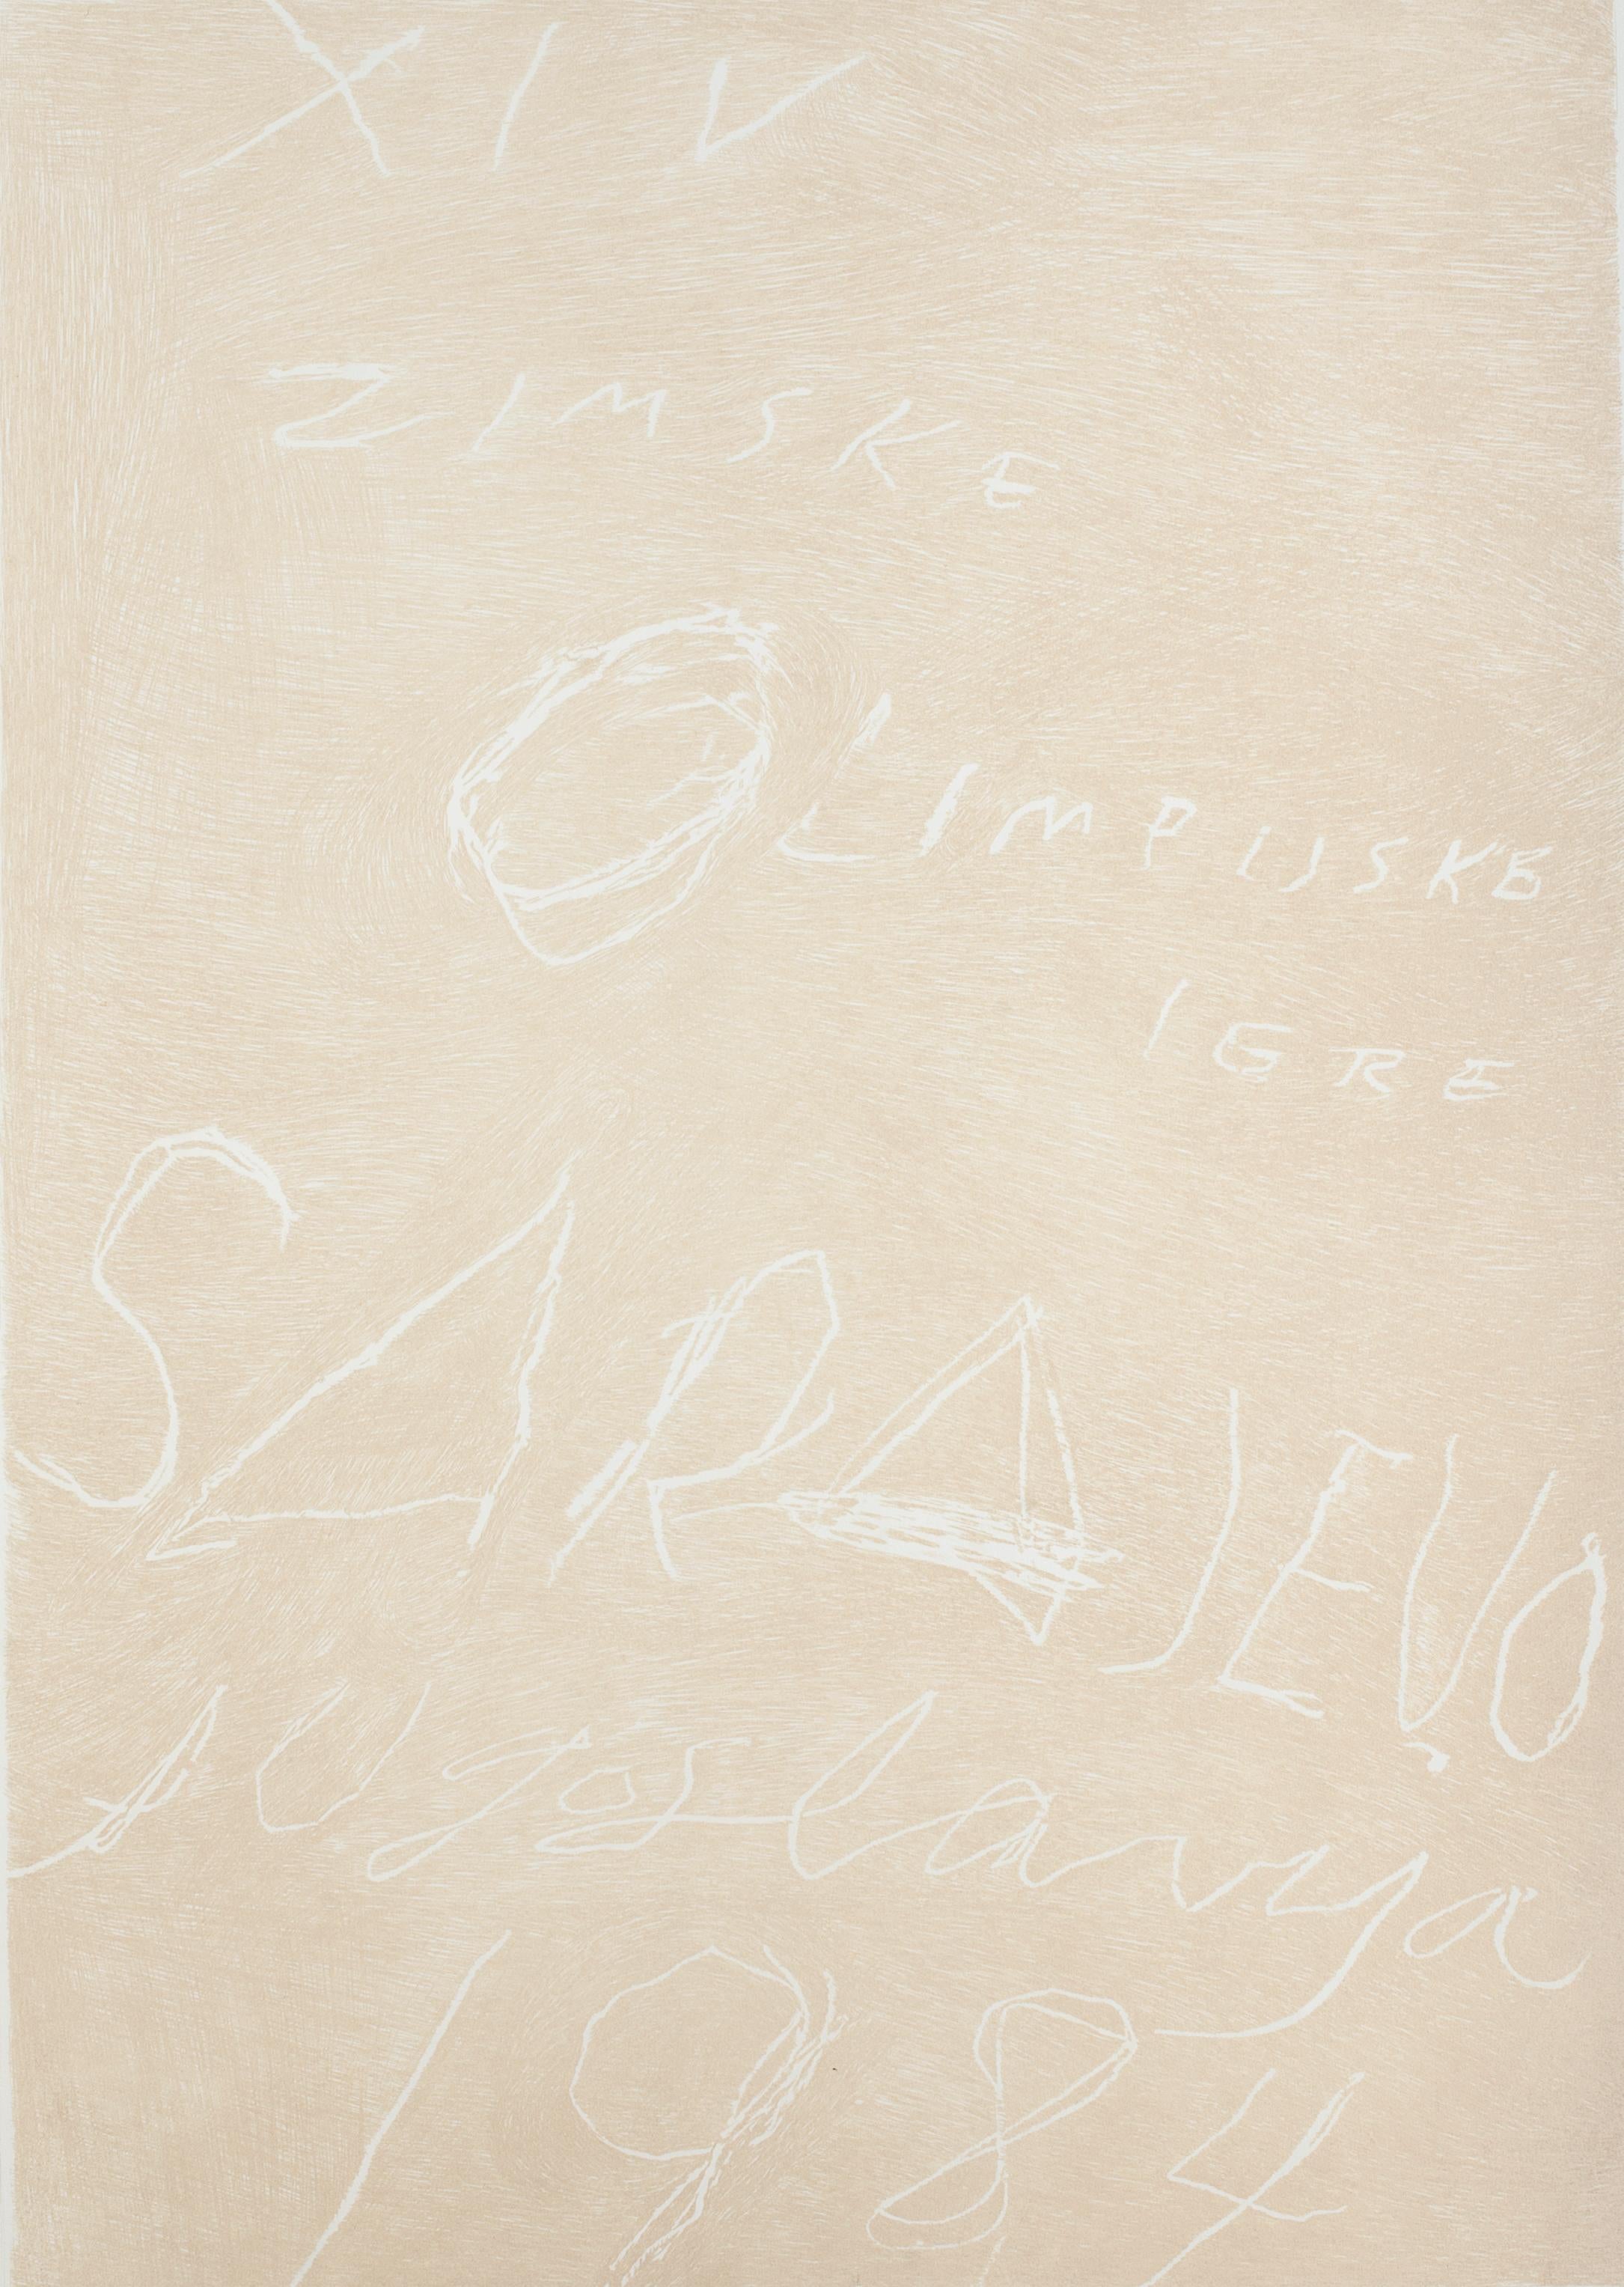 cy twombly etching